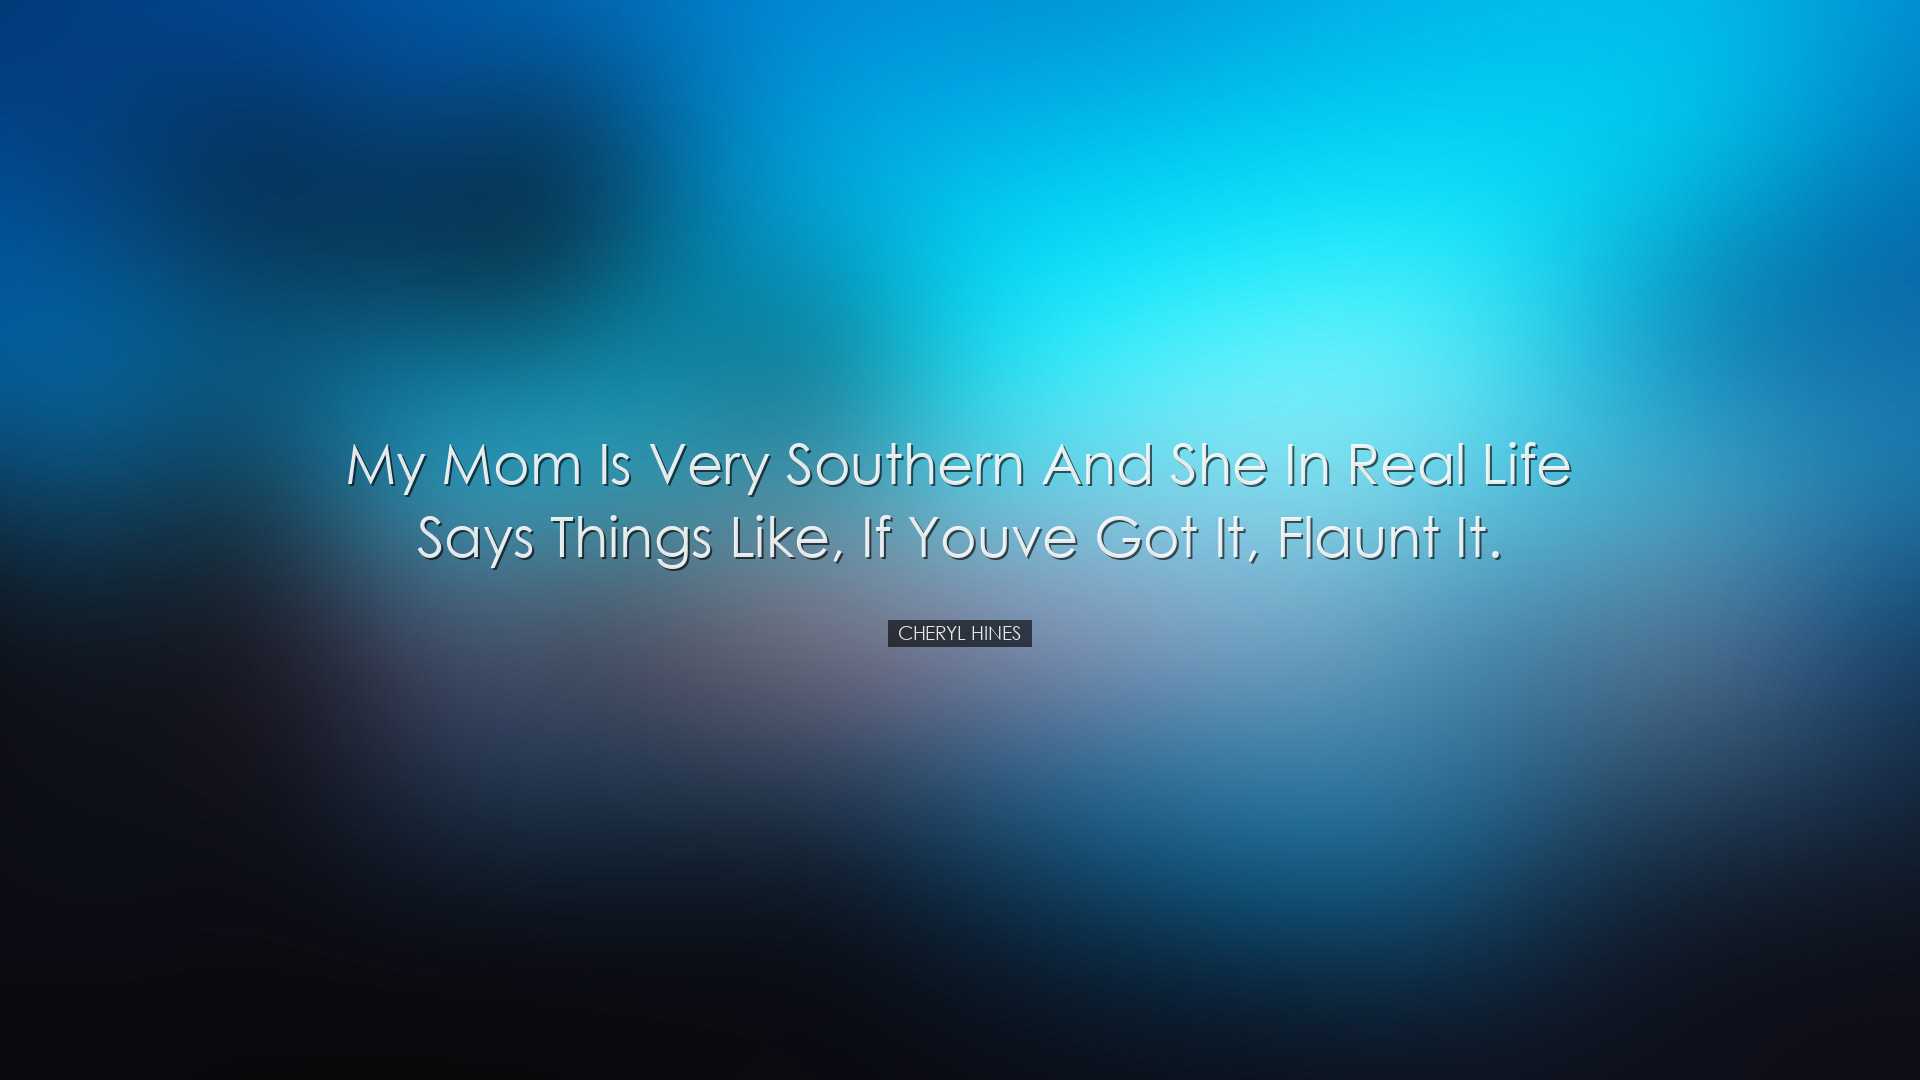 My mom is very Southern and she in real life says things like, If